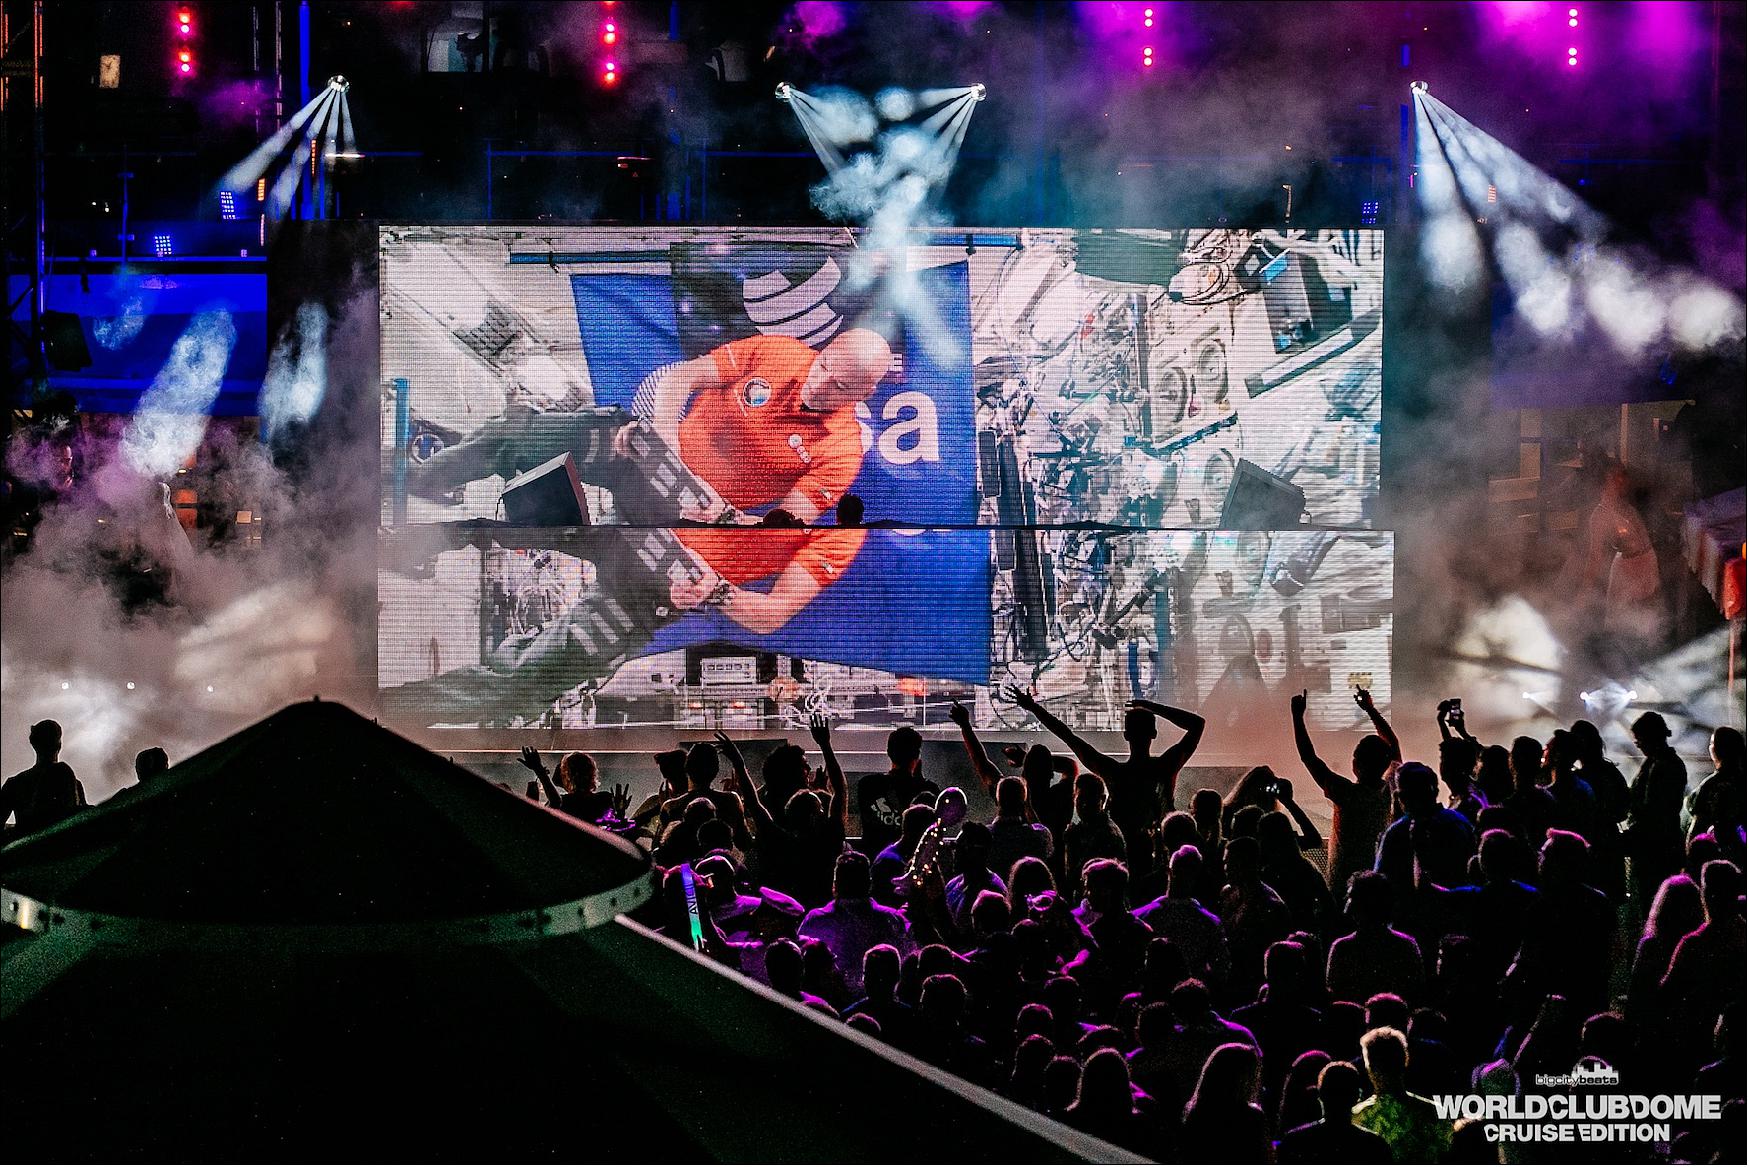 Figure 63: ESA astronaut Luca Parmitano made space (and music) history on 13 August 2019 when he broadcast the first DJ music set from orbit, performing to an audience of over 3000 people as part of the BigCityBeats WORLD CLUB DOME Cruise Edition. The results of his work were beamed to the main stage on board the cruise ship Norwegian Pearl moored at the Spanish island of Ibiza. His set of around 12 minutes was played as part of the regular program of DJs at the festival. This was the first time that a DJ set has been played from the International Space Station and, indeed, from space (image credit: World Club Dome/ESA)